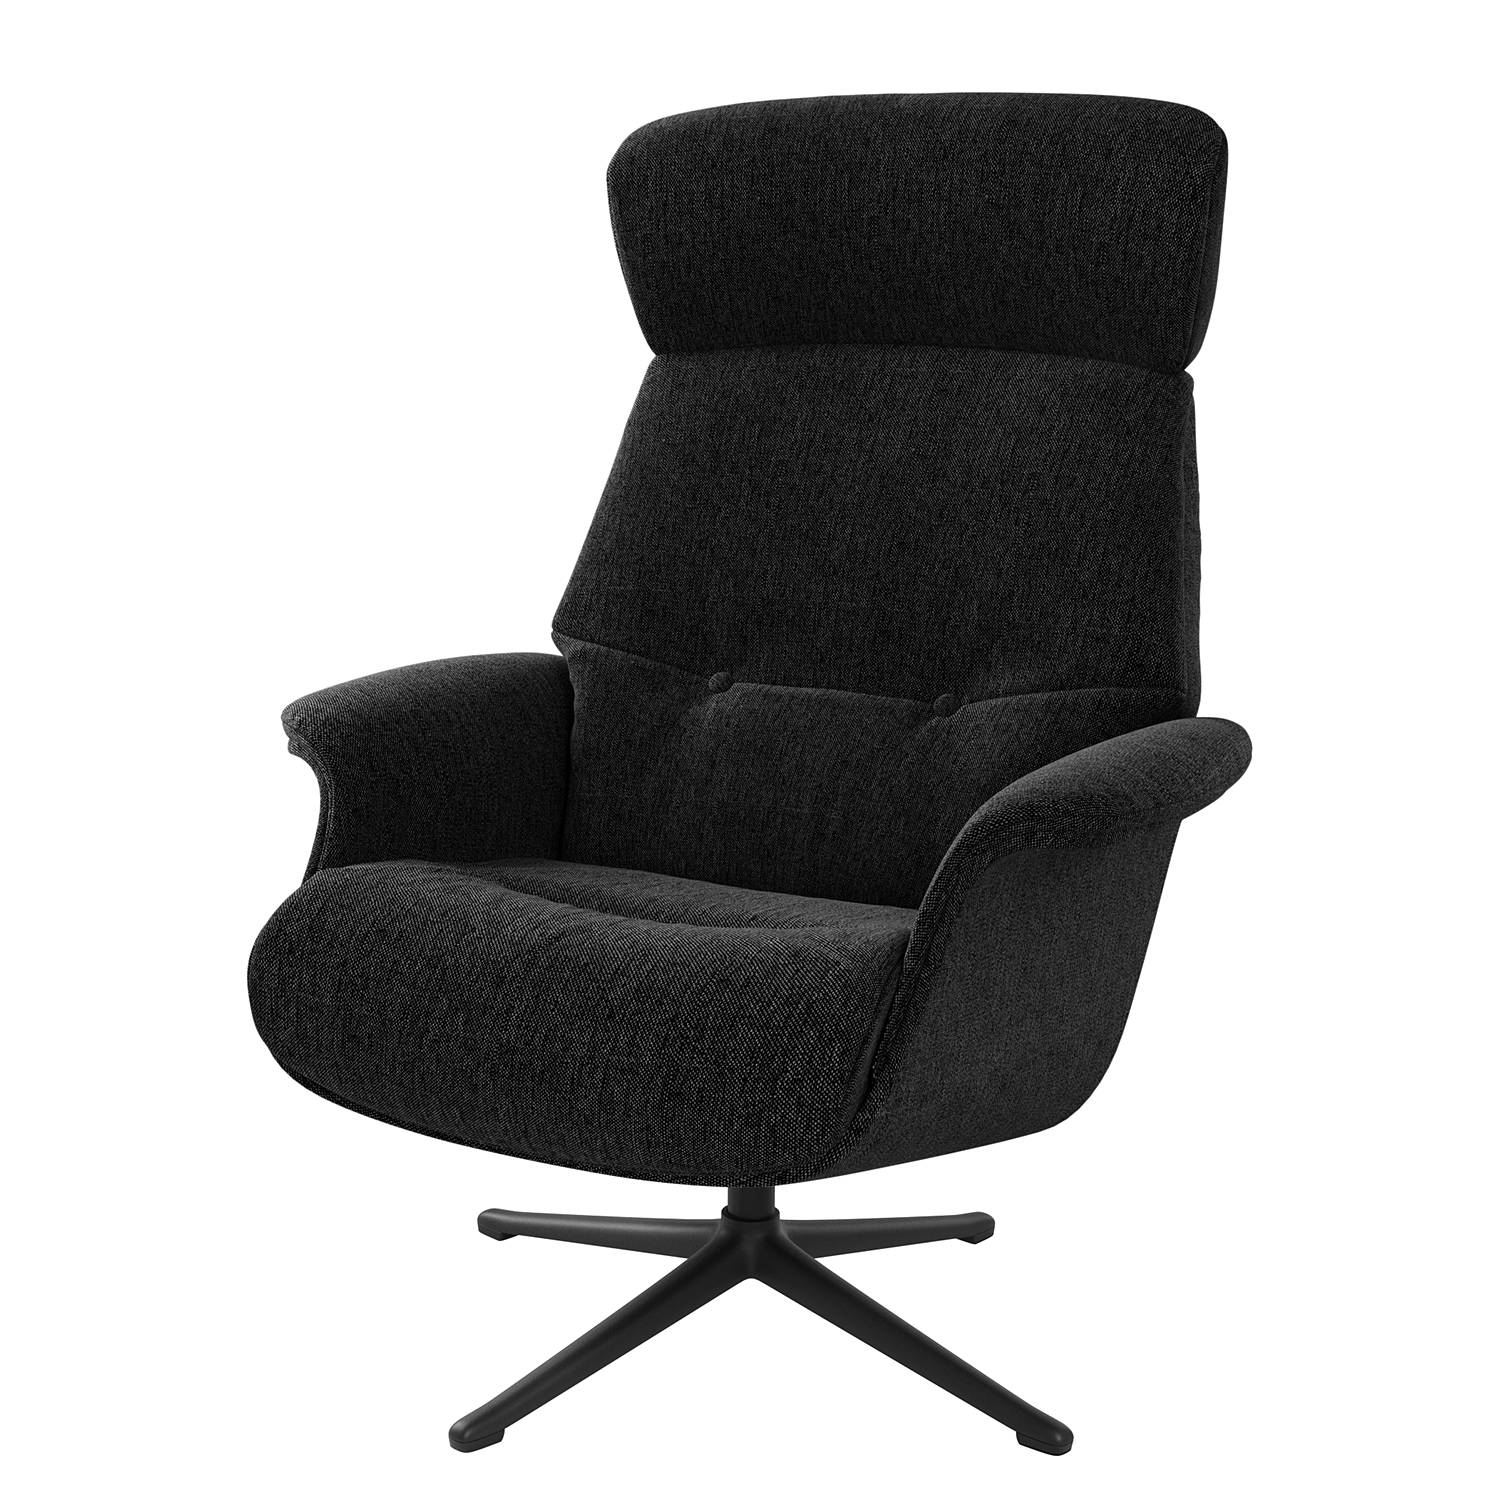 Image of Fauteuil relax Anderson IV 000000001000131304